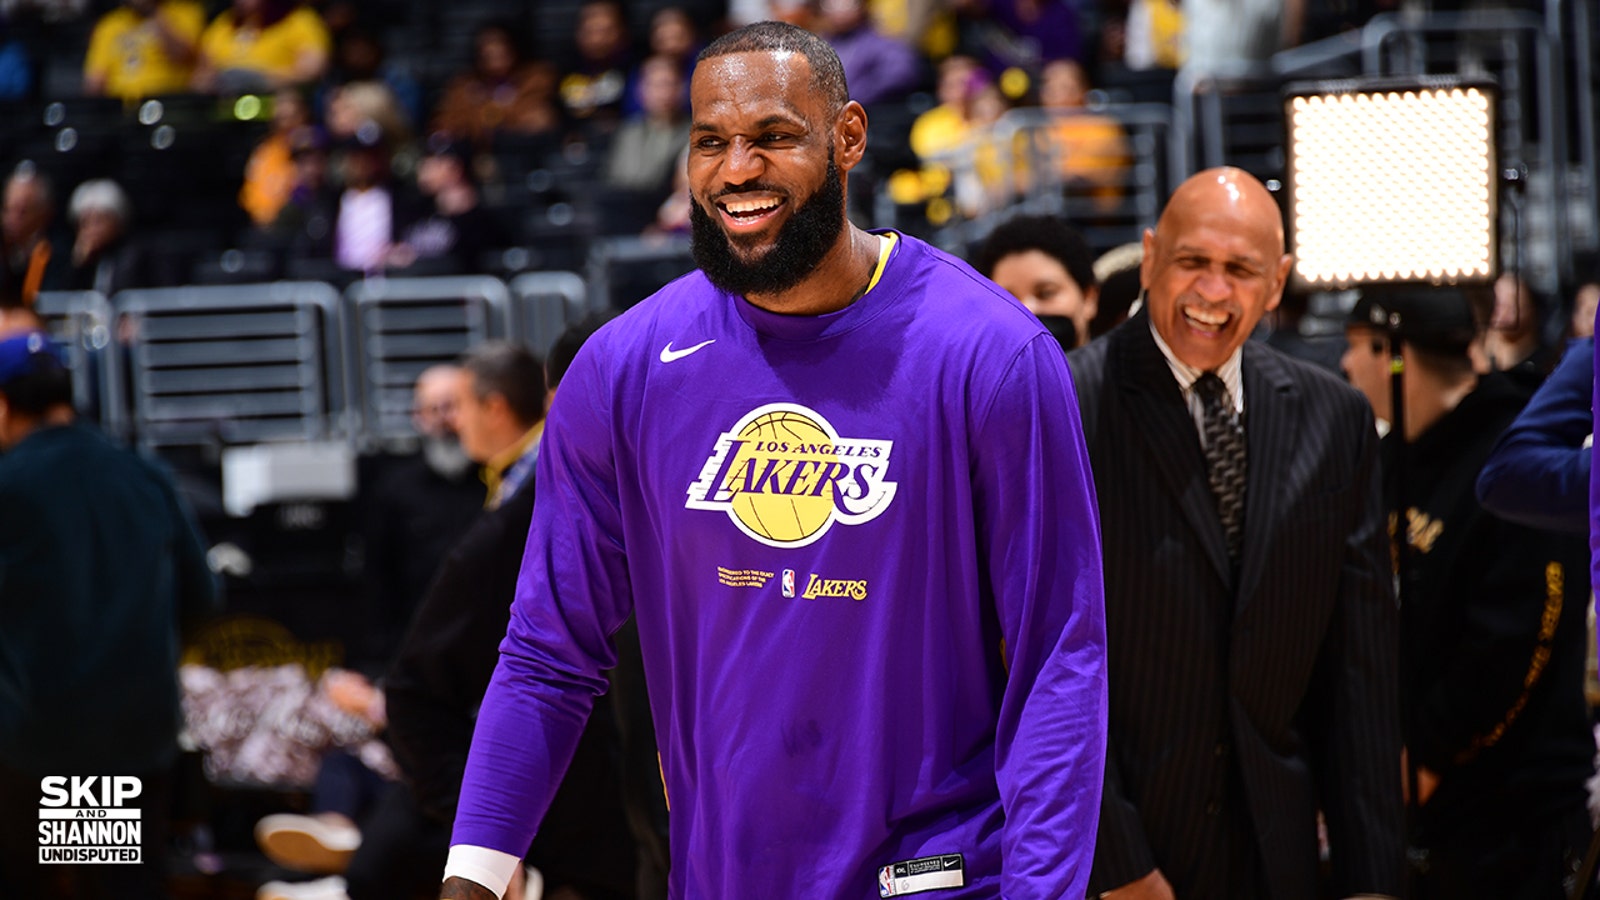 LeBron James: 89 points shy of passing Kareem Abdul-Jabbar for most all-time 